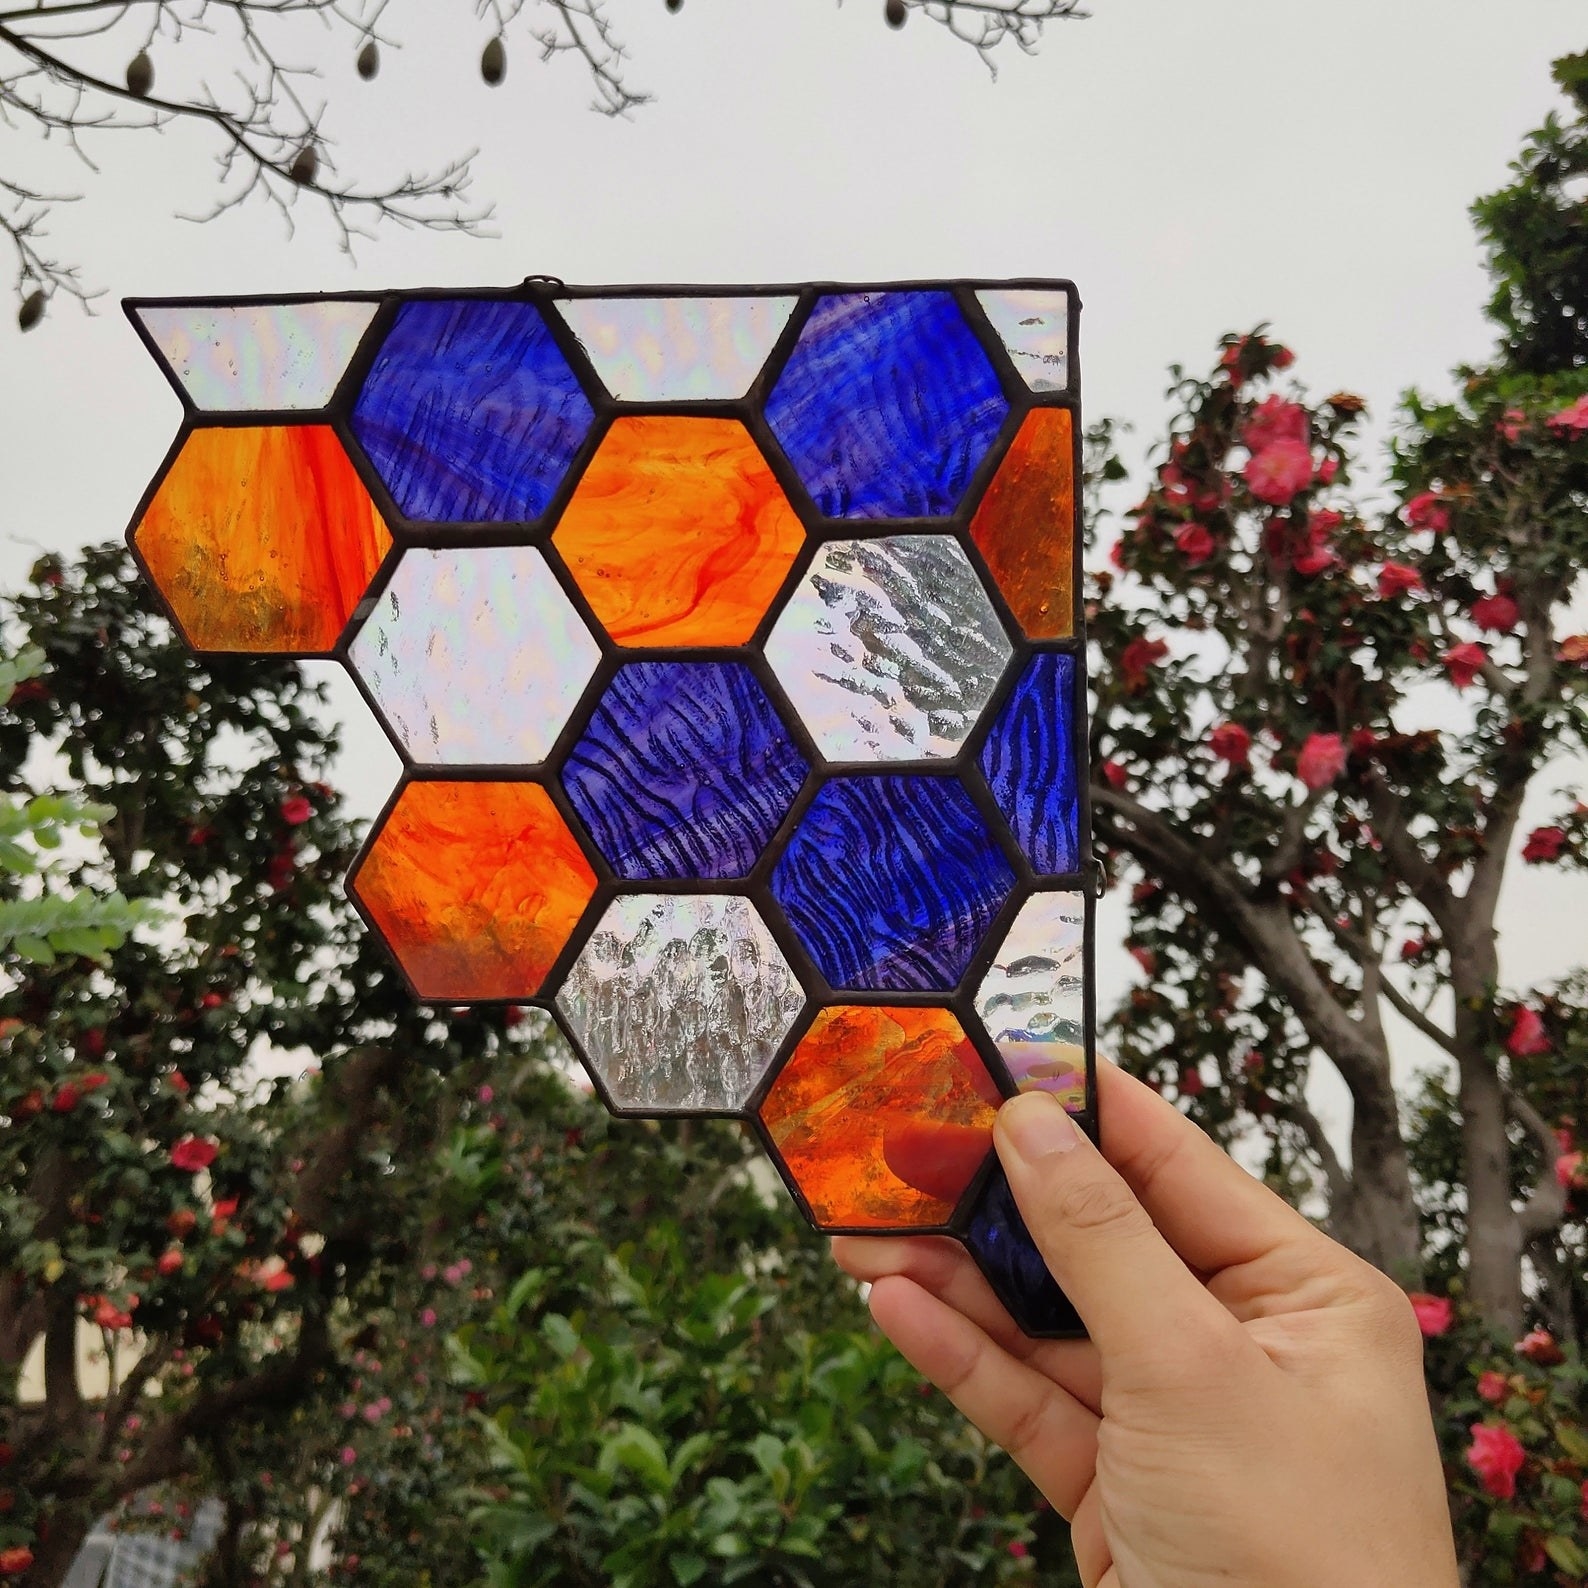 a hand holds the stained glass honeycomb sun catcher up to the sky